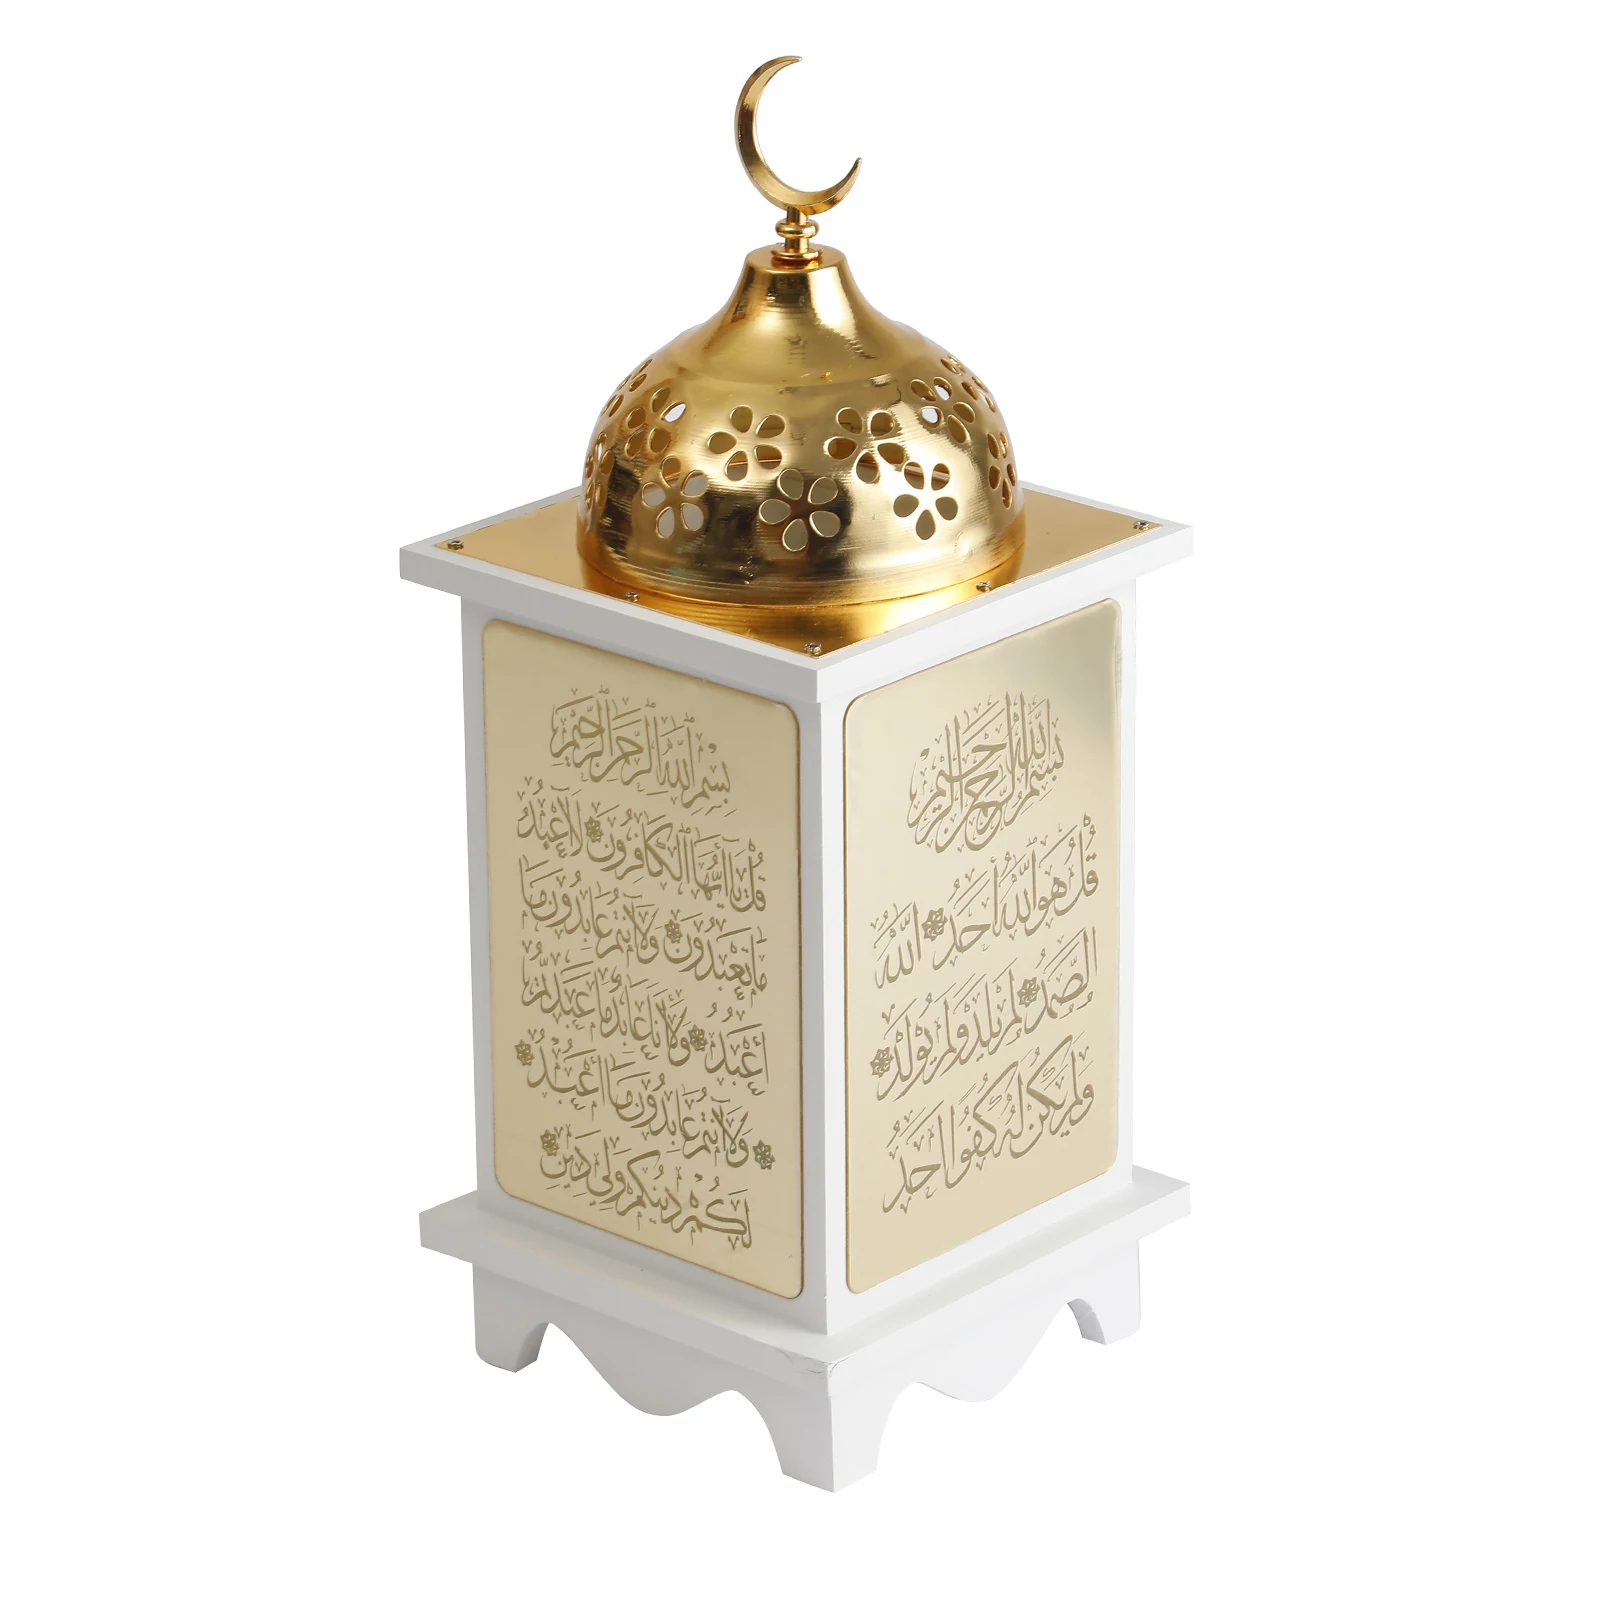 

Mosque shape islamic gift colorful night light usb rechargeable quran mini cube player, White&golden